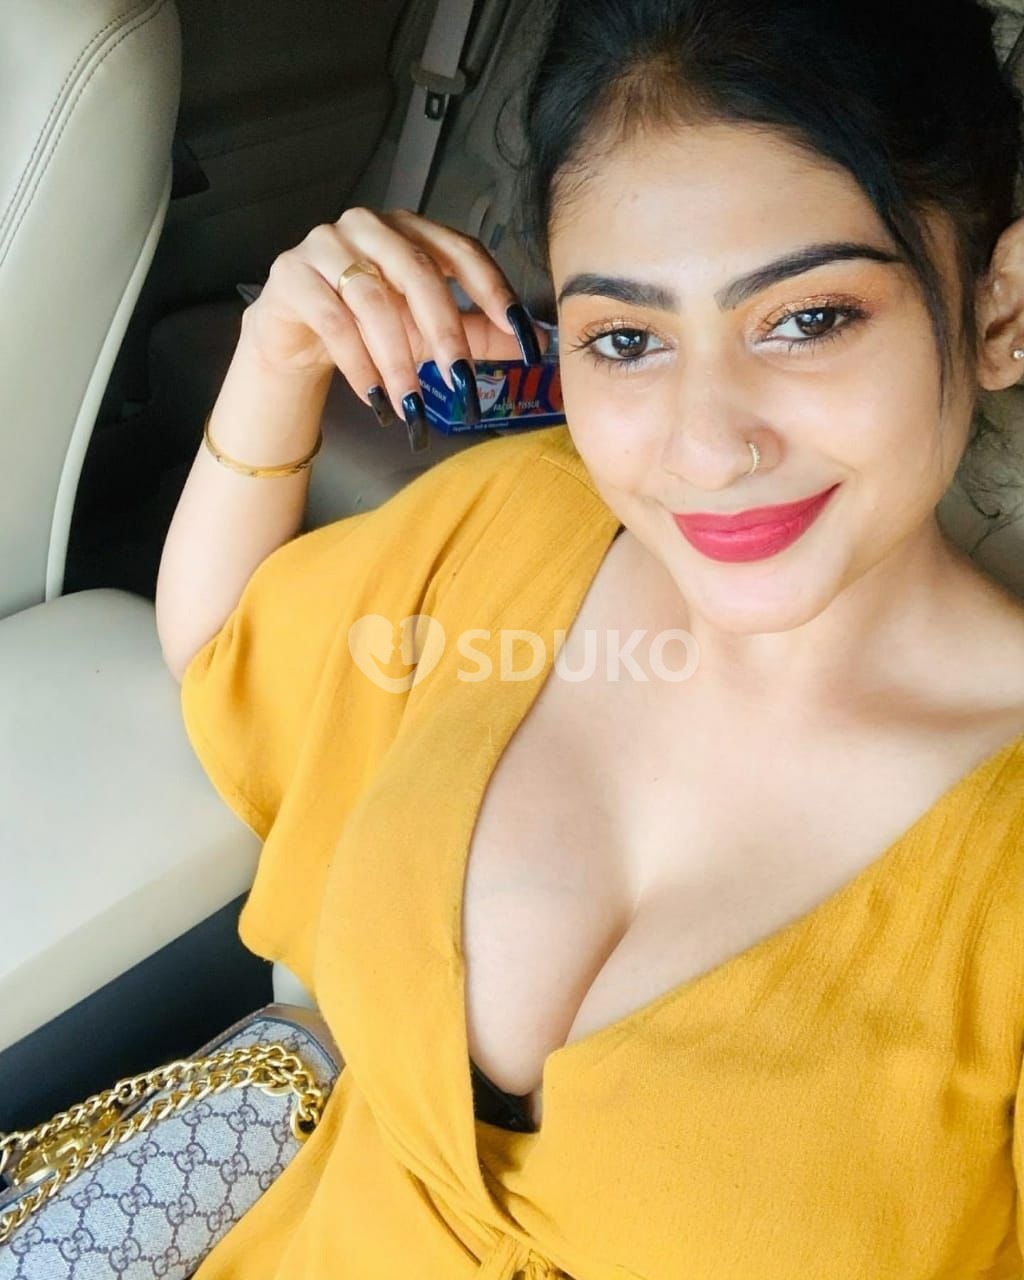 Jadavpur 92564/71656 now available call girl full safe and secure without condom sucking kissing all services available